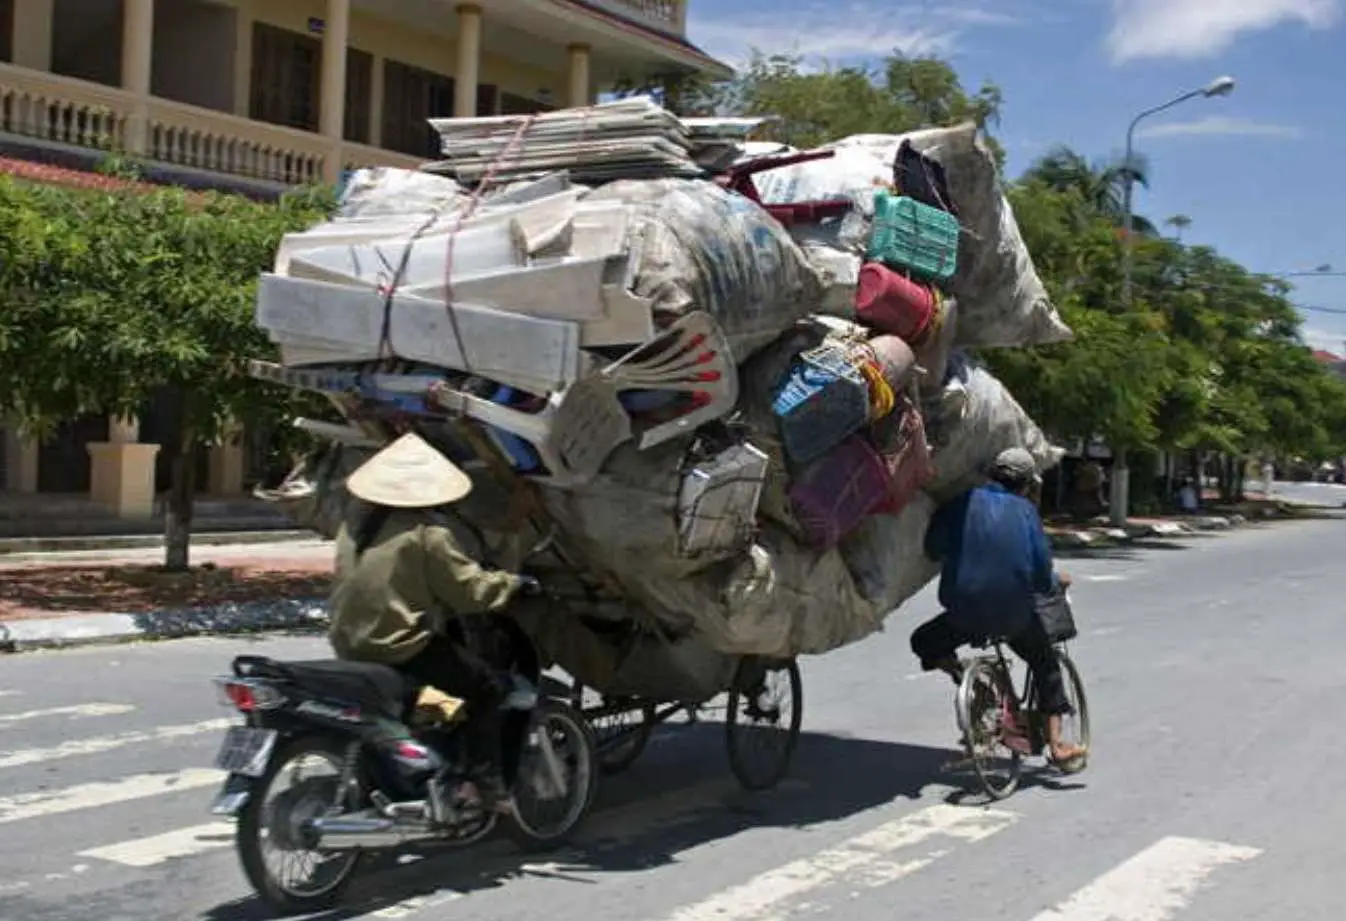 Transporting Rubbish Via Scooter